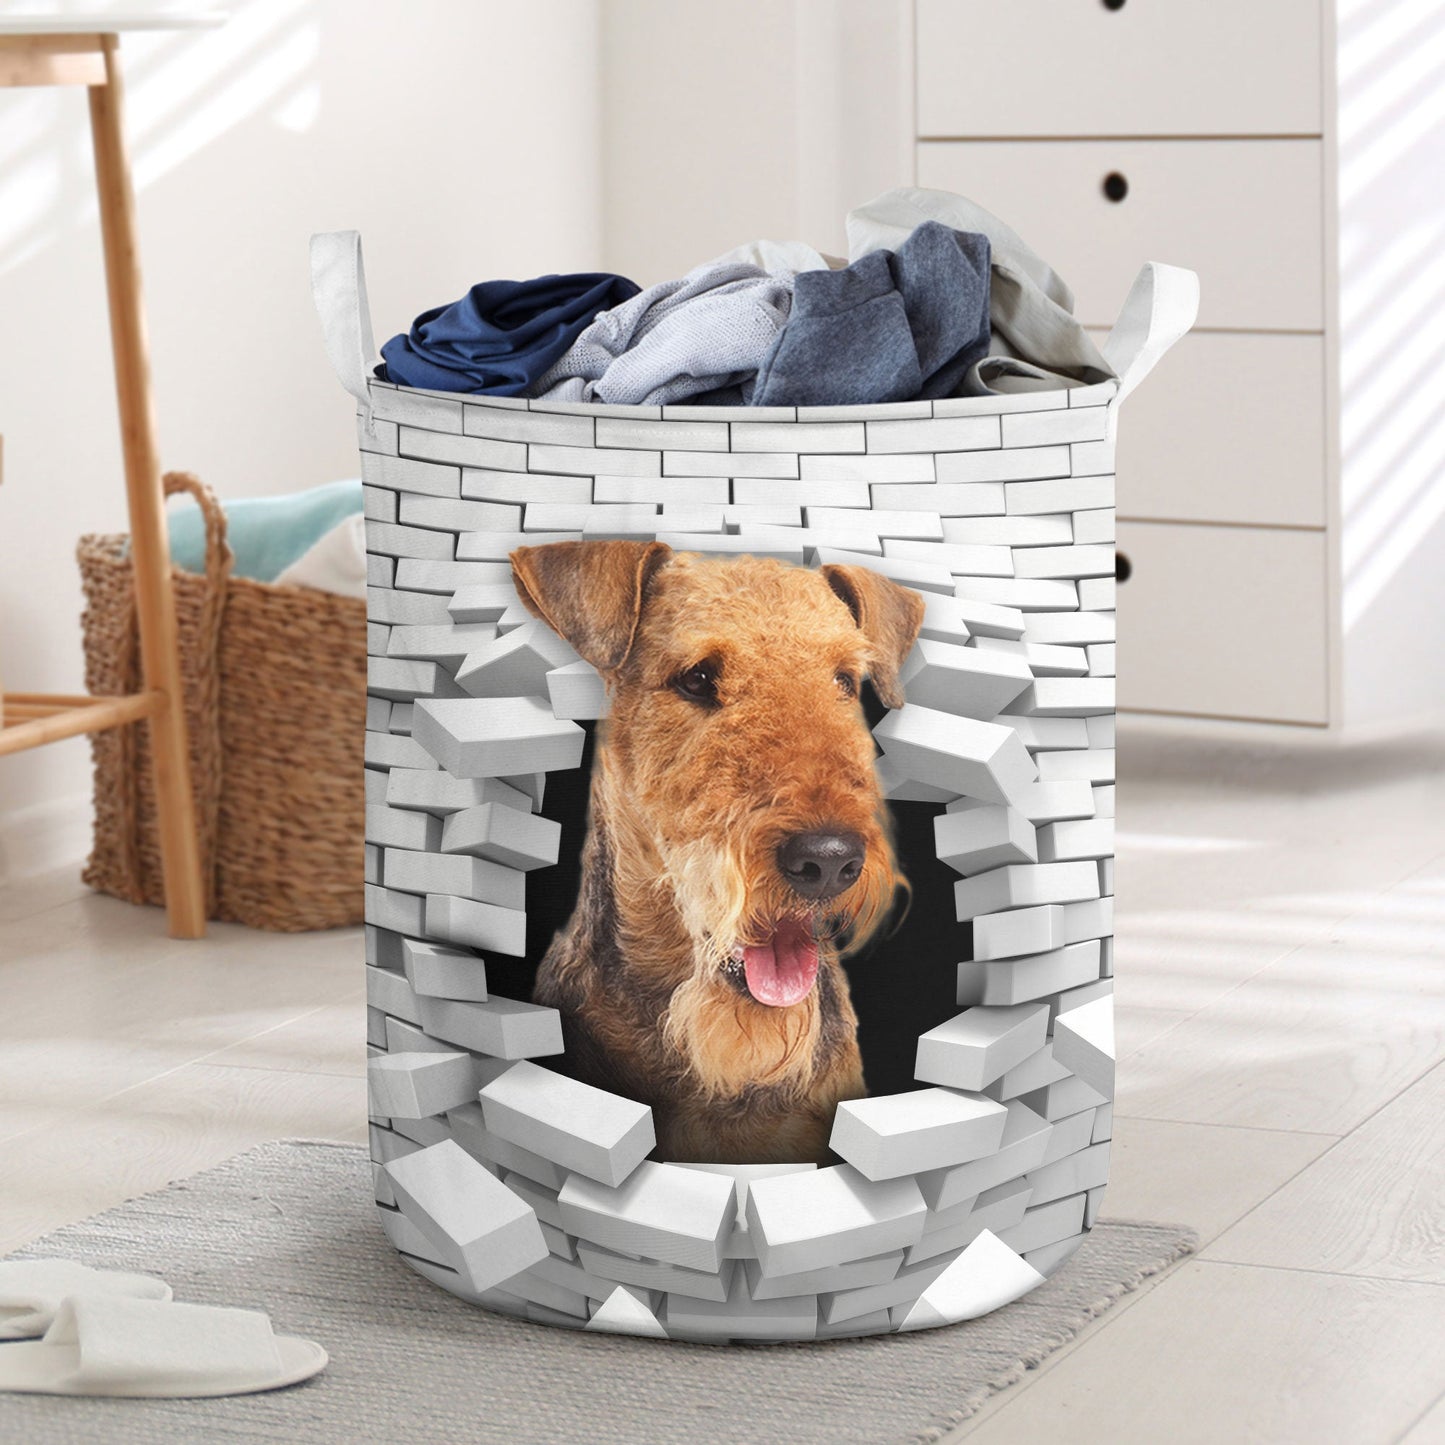 Airedale Terrier - In The Hole Of Wall Pattern Laundry Basket